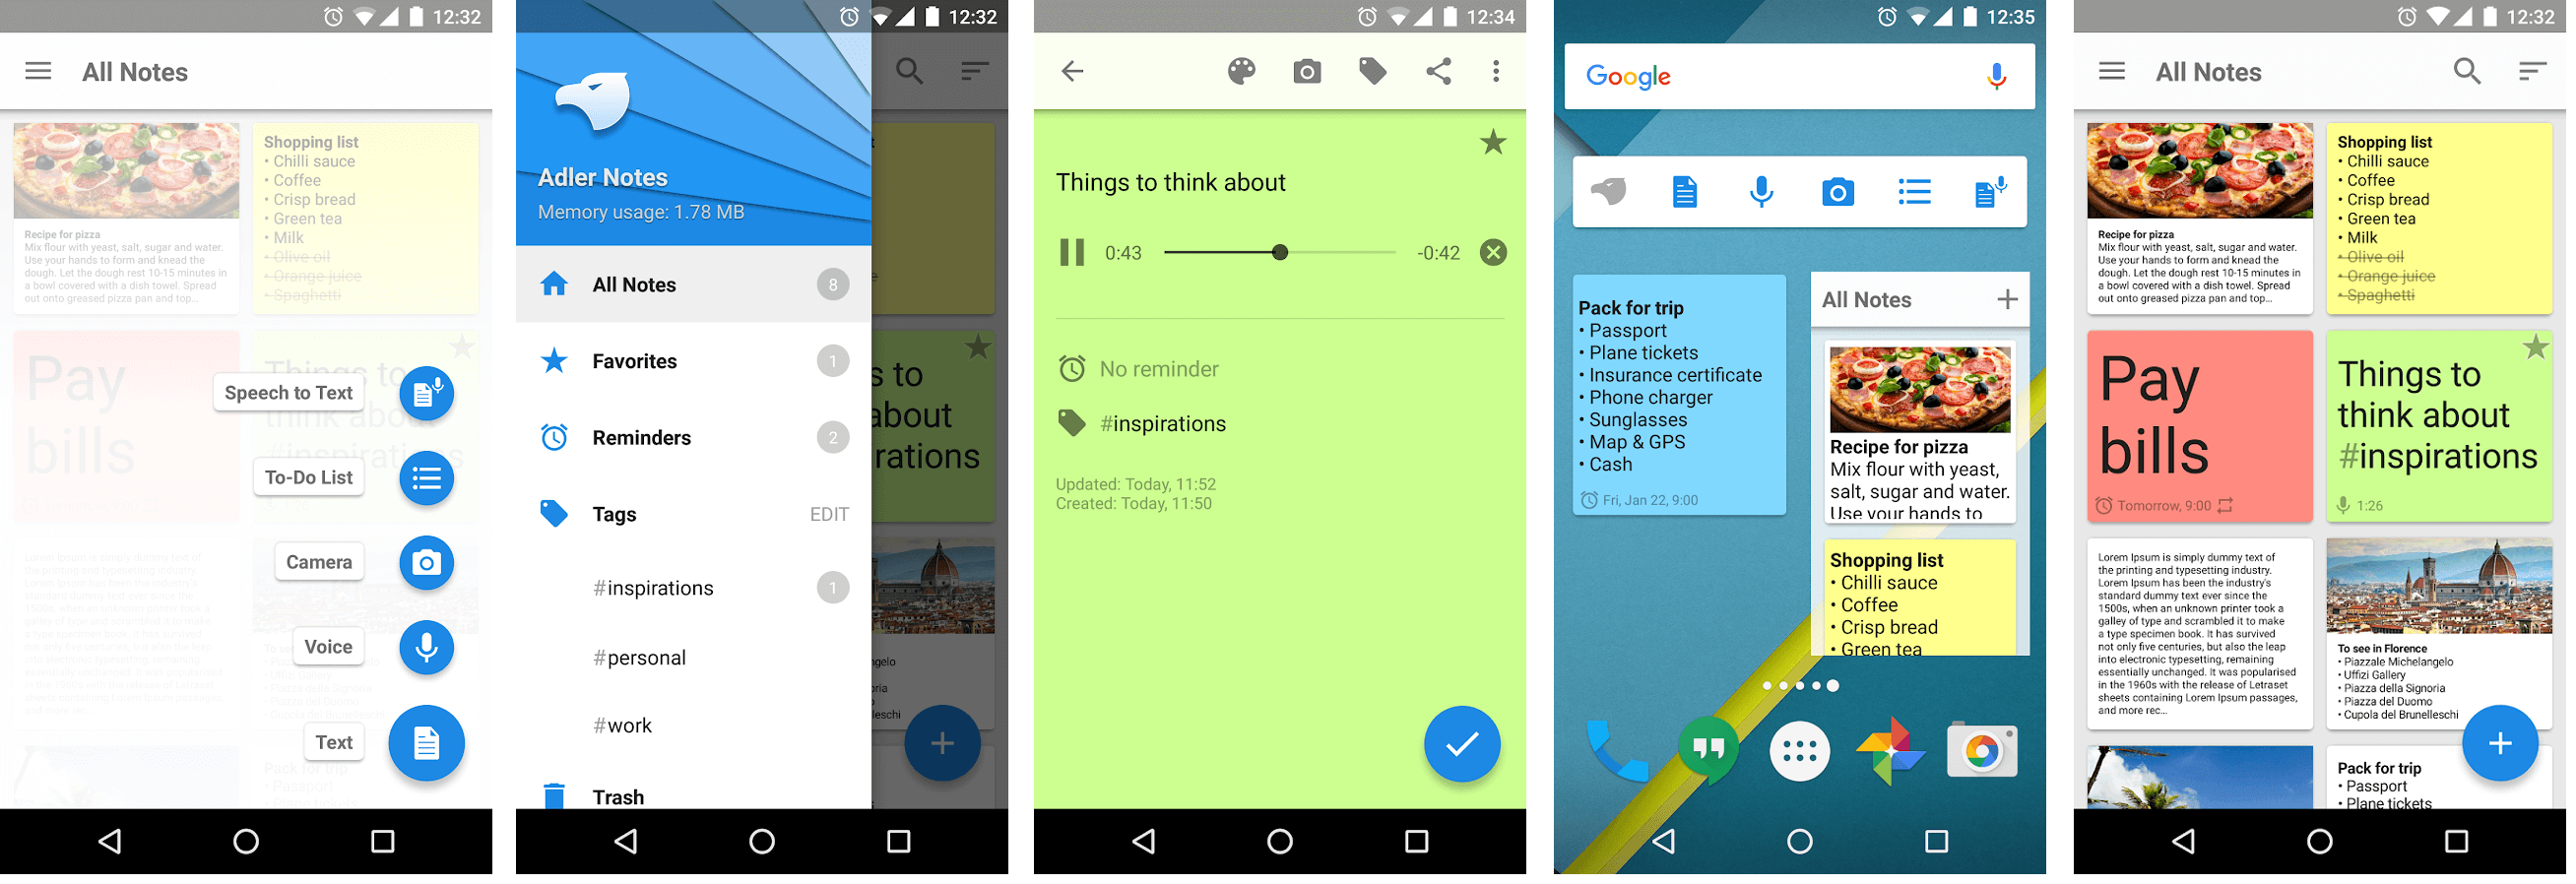 Notepad note taking app for Android